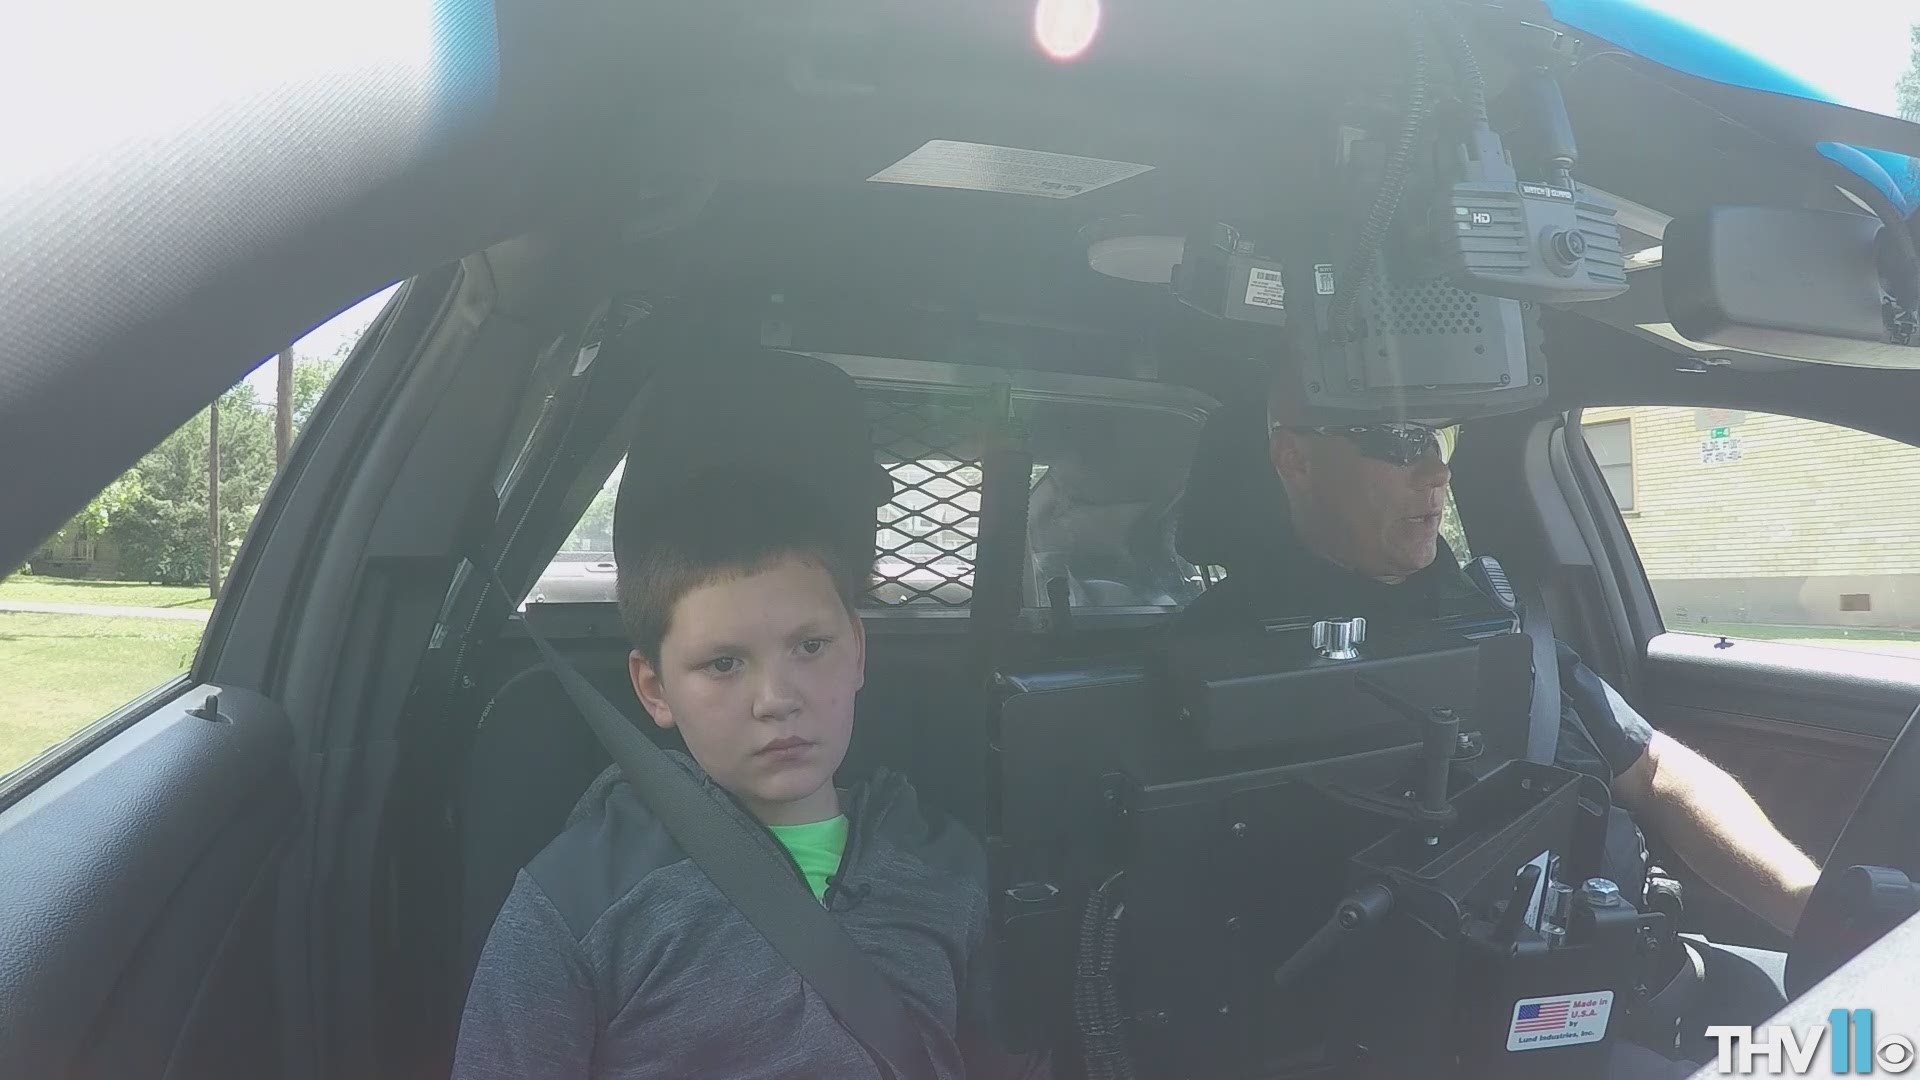 THV11's Dawn Scott features Nathaniel, a 12-year-old boy who is up for adoption and wants to be a police officer.